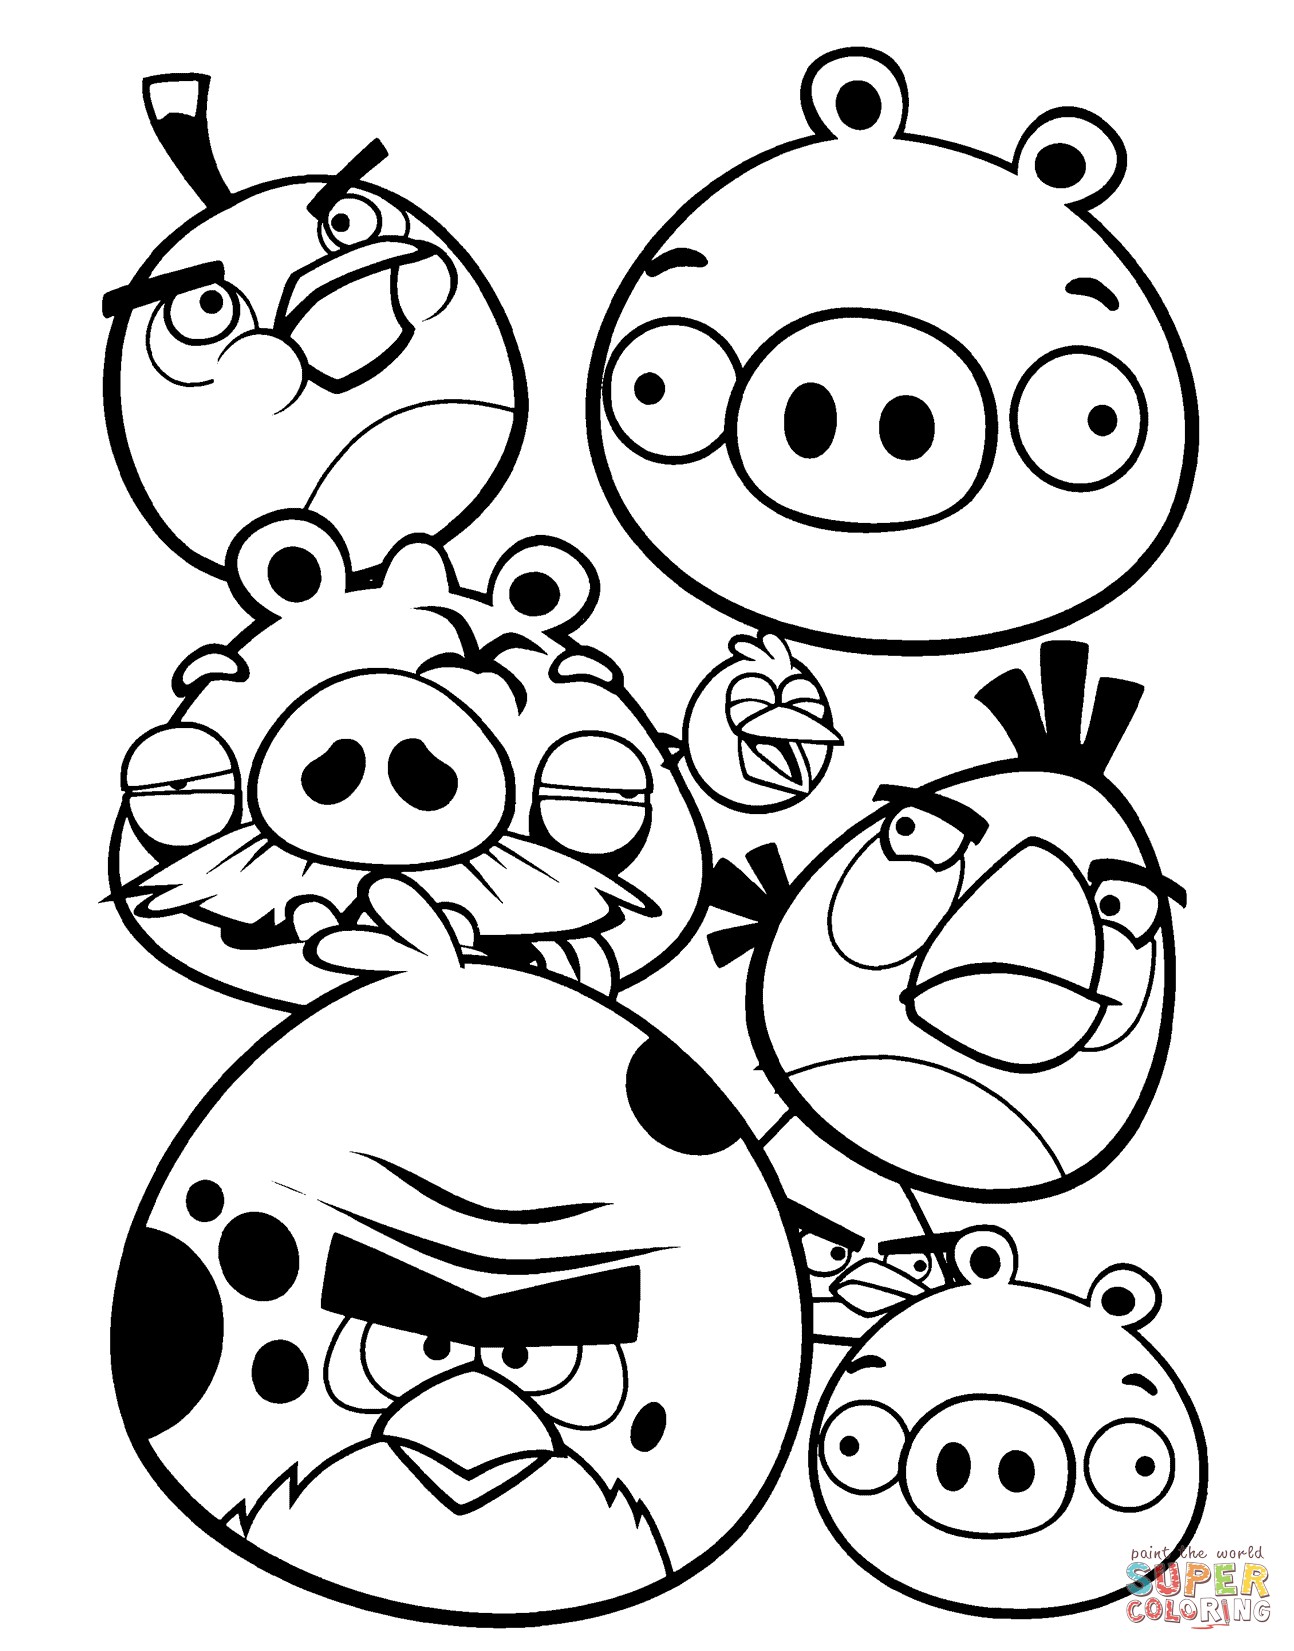 Awesome Angry Bird Coloring Pages 32 Download Coloring Pages with Angry Bird Coloring Pages